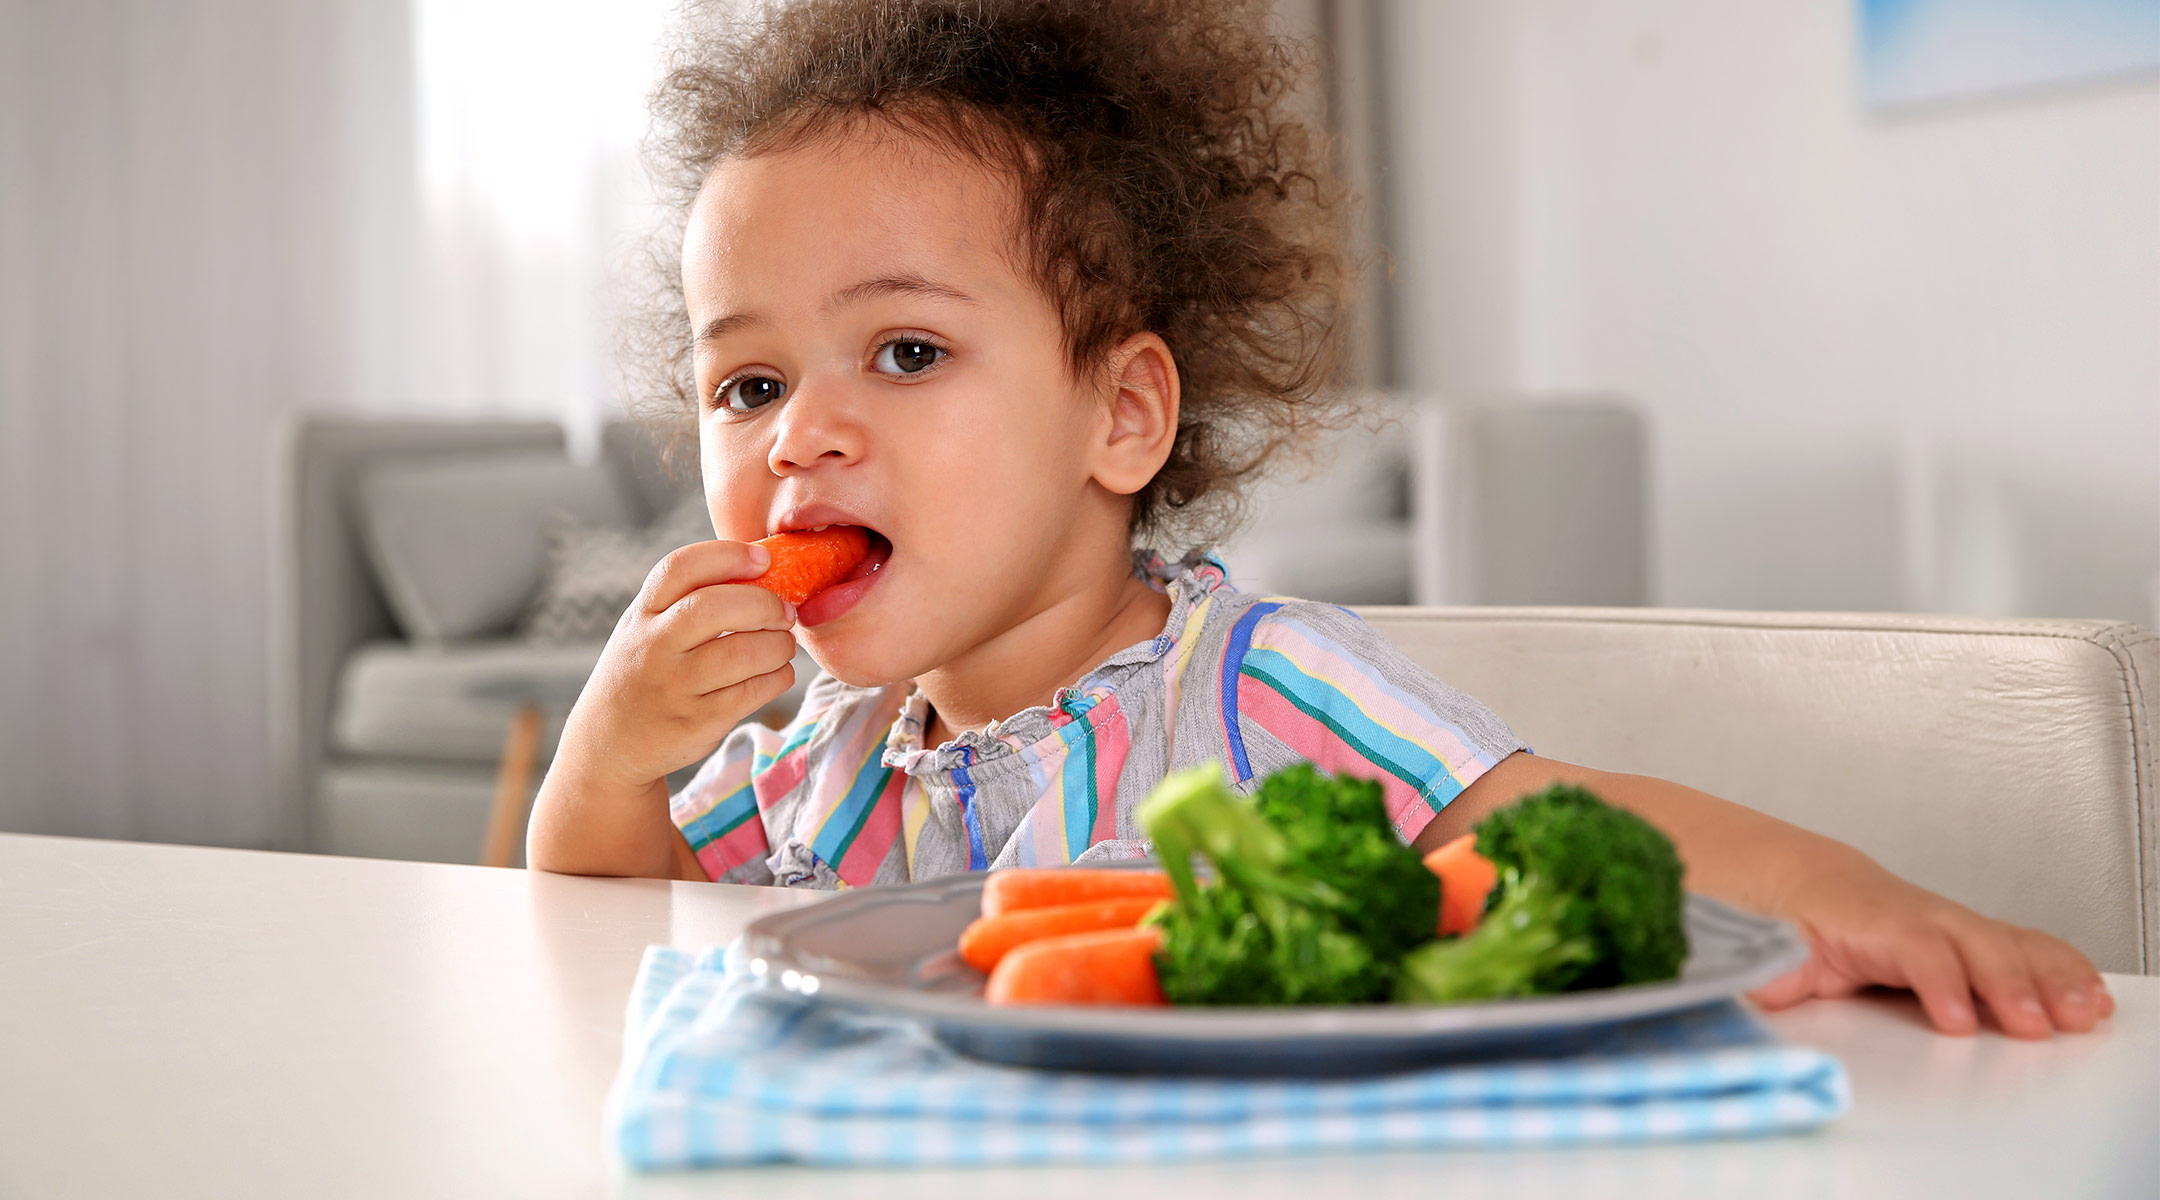 toddler eating a healthy snack, carrots and broccoli 